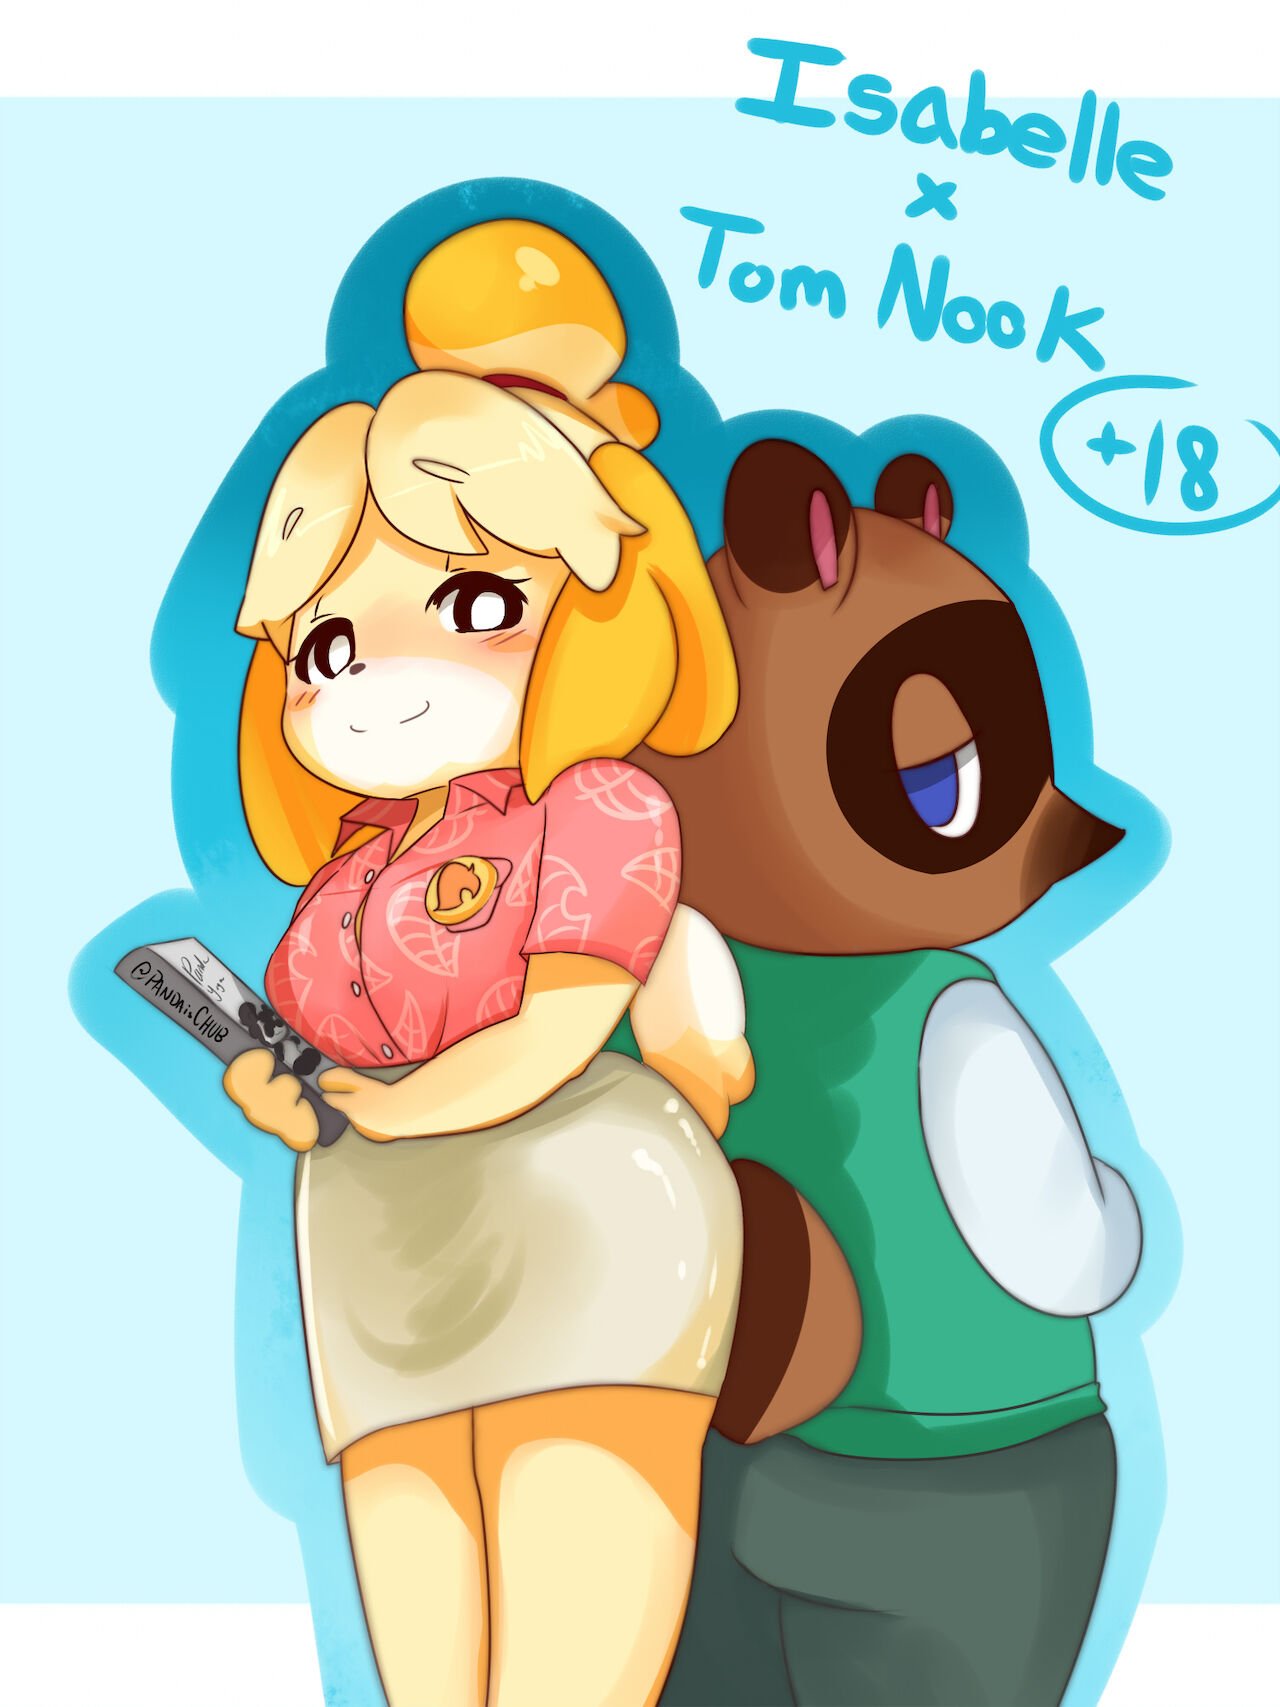 Isabelle and villager porn comic